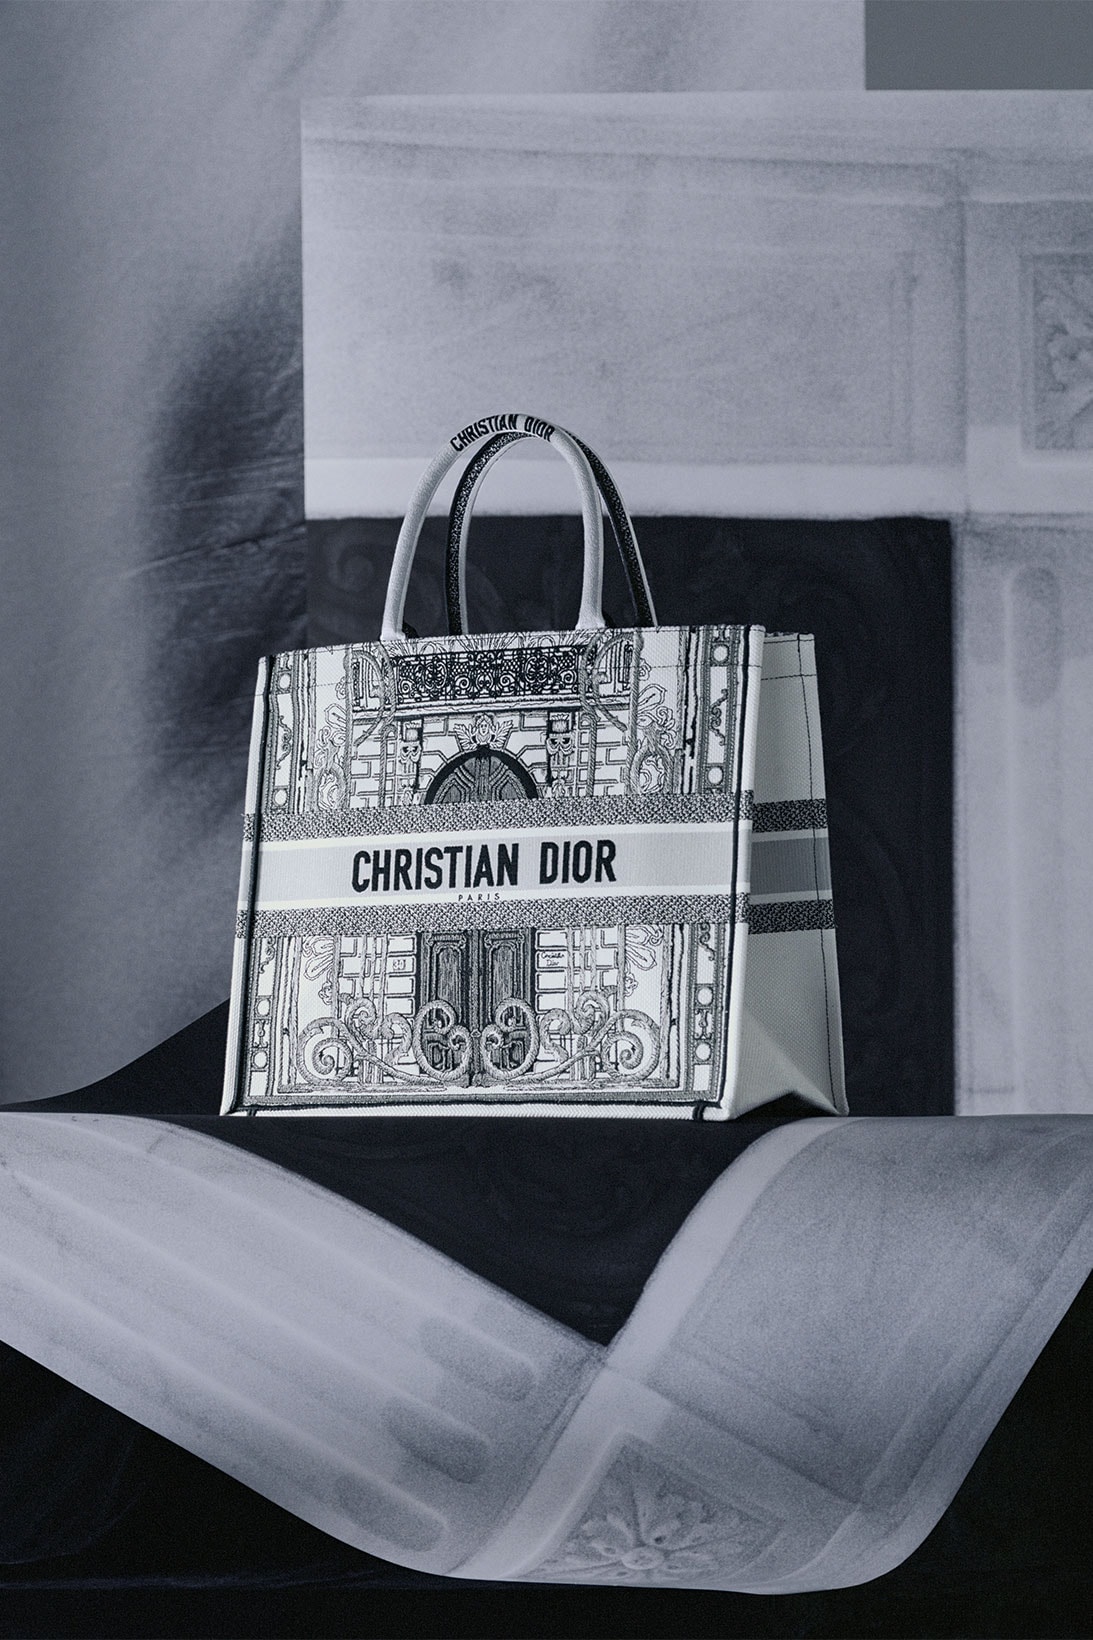 Kim Kardashian's Dior bag is so exclusive, only 10 bags exist